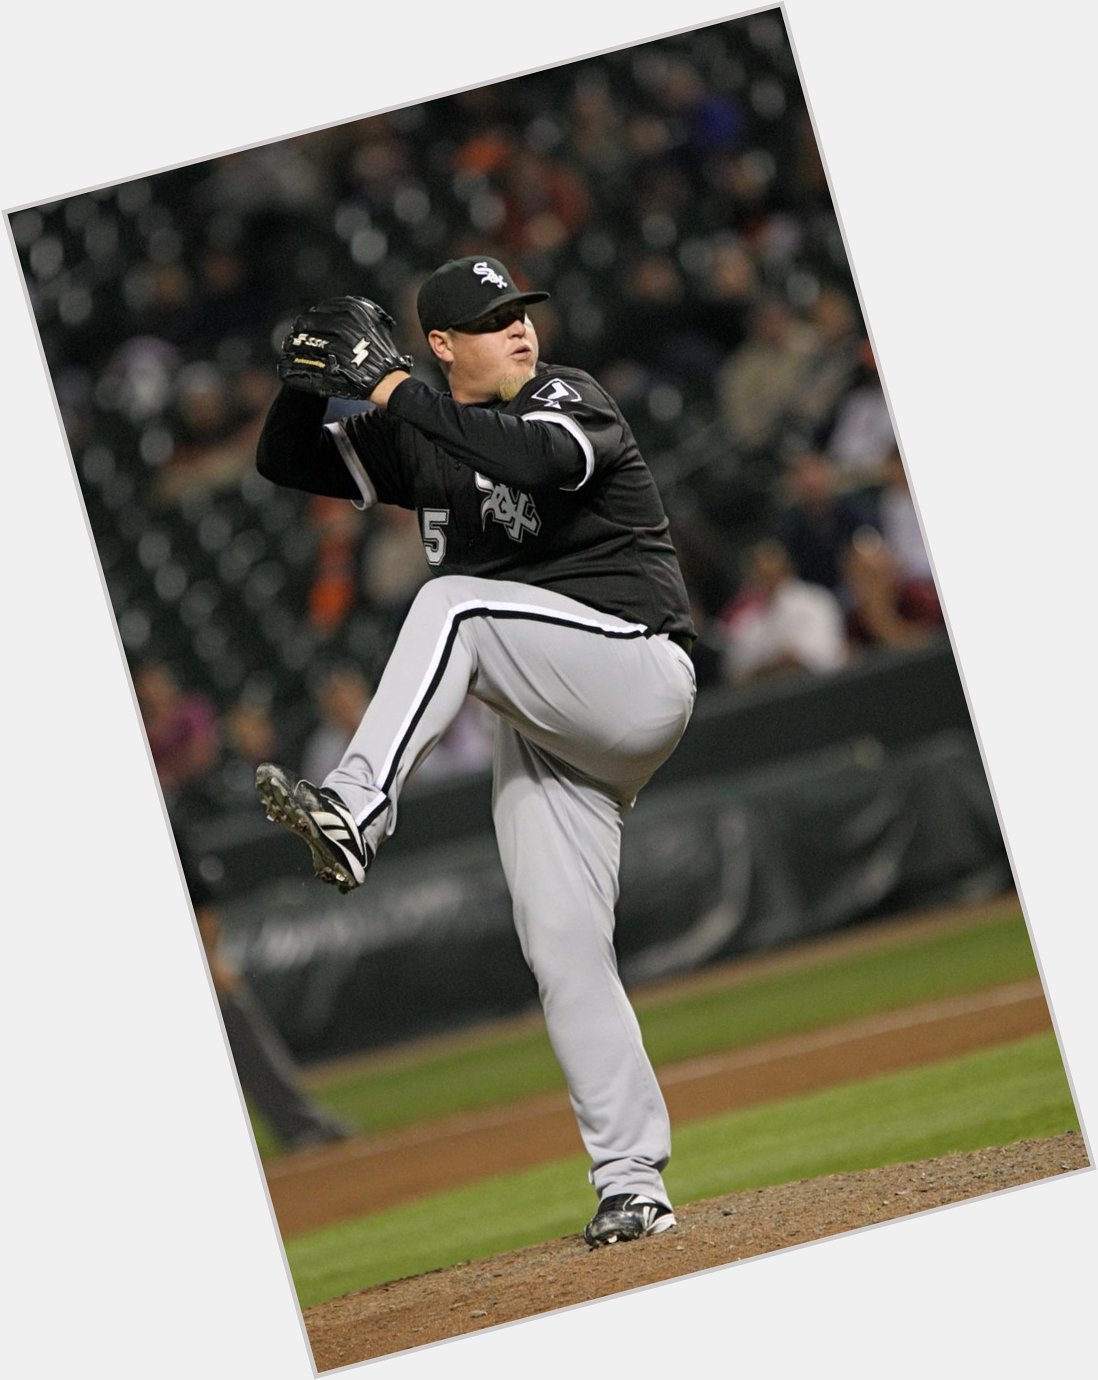 Happy 34th Birthday to former Bobby Jenks! A RHR 2005-2010, he had a 3.40 ERA in 329 games and 341.2 IP. 